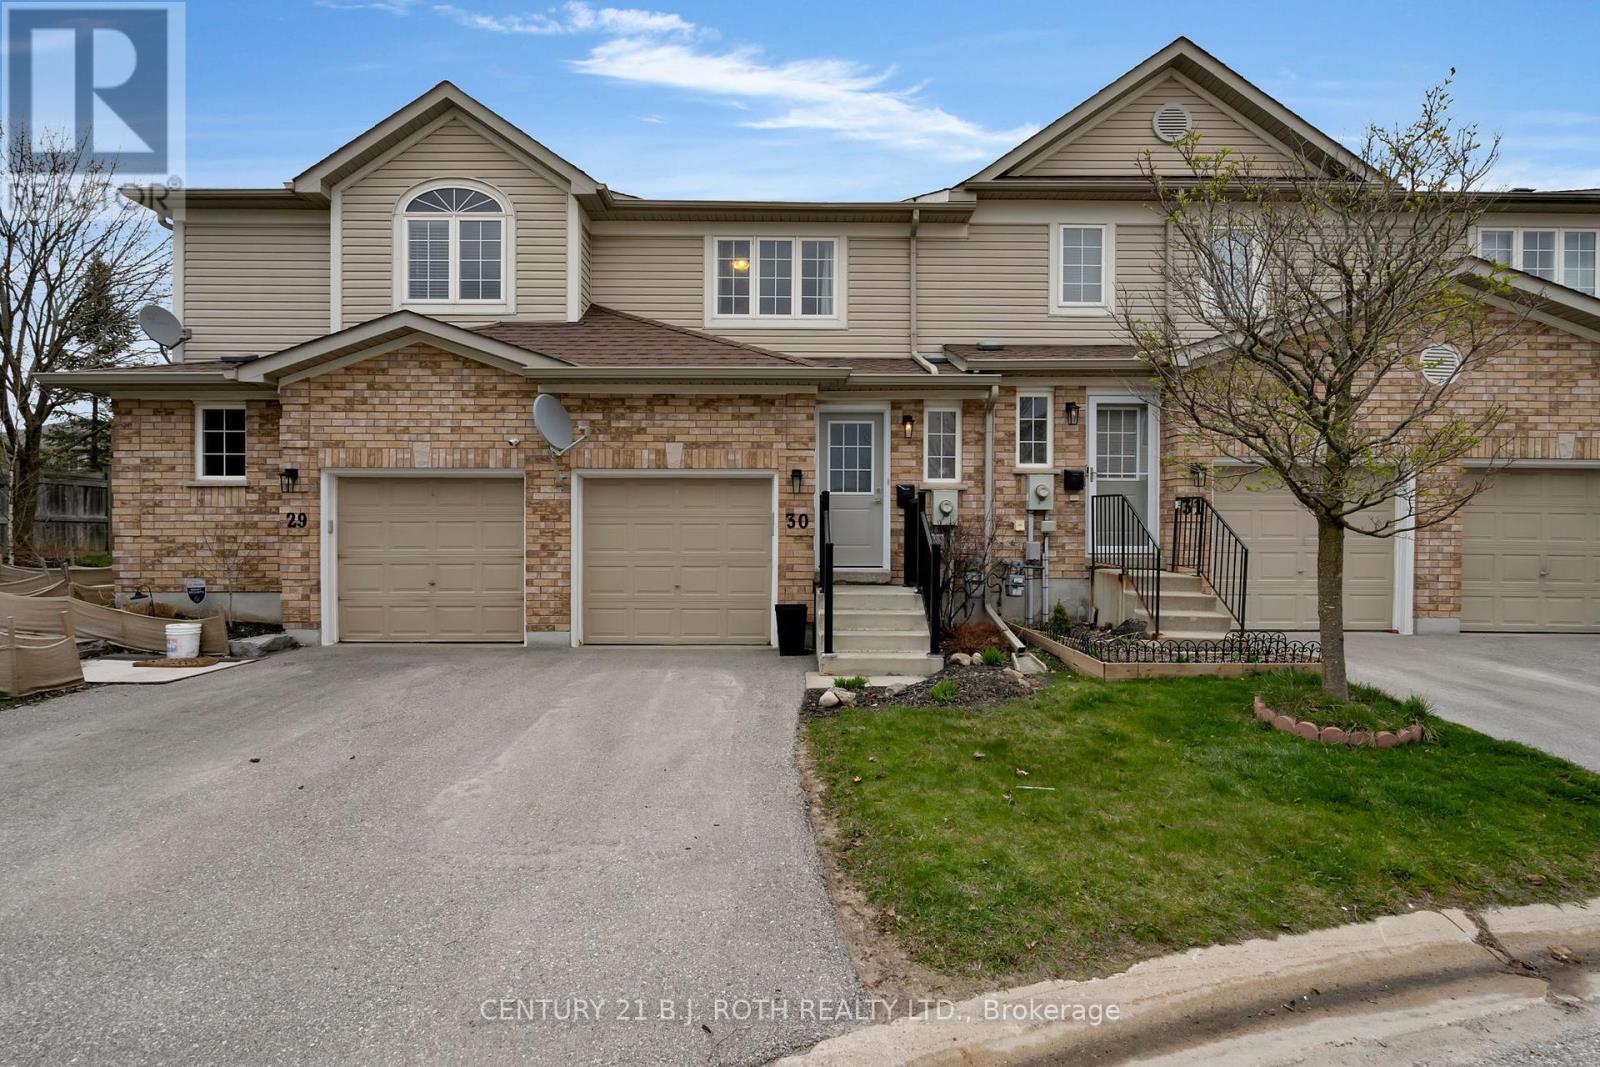 #30 -430 MAPLEVIEW DR E, barrie, Ontario